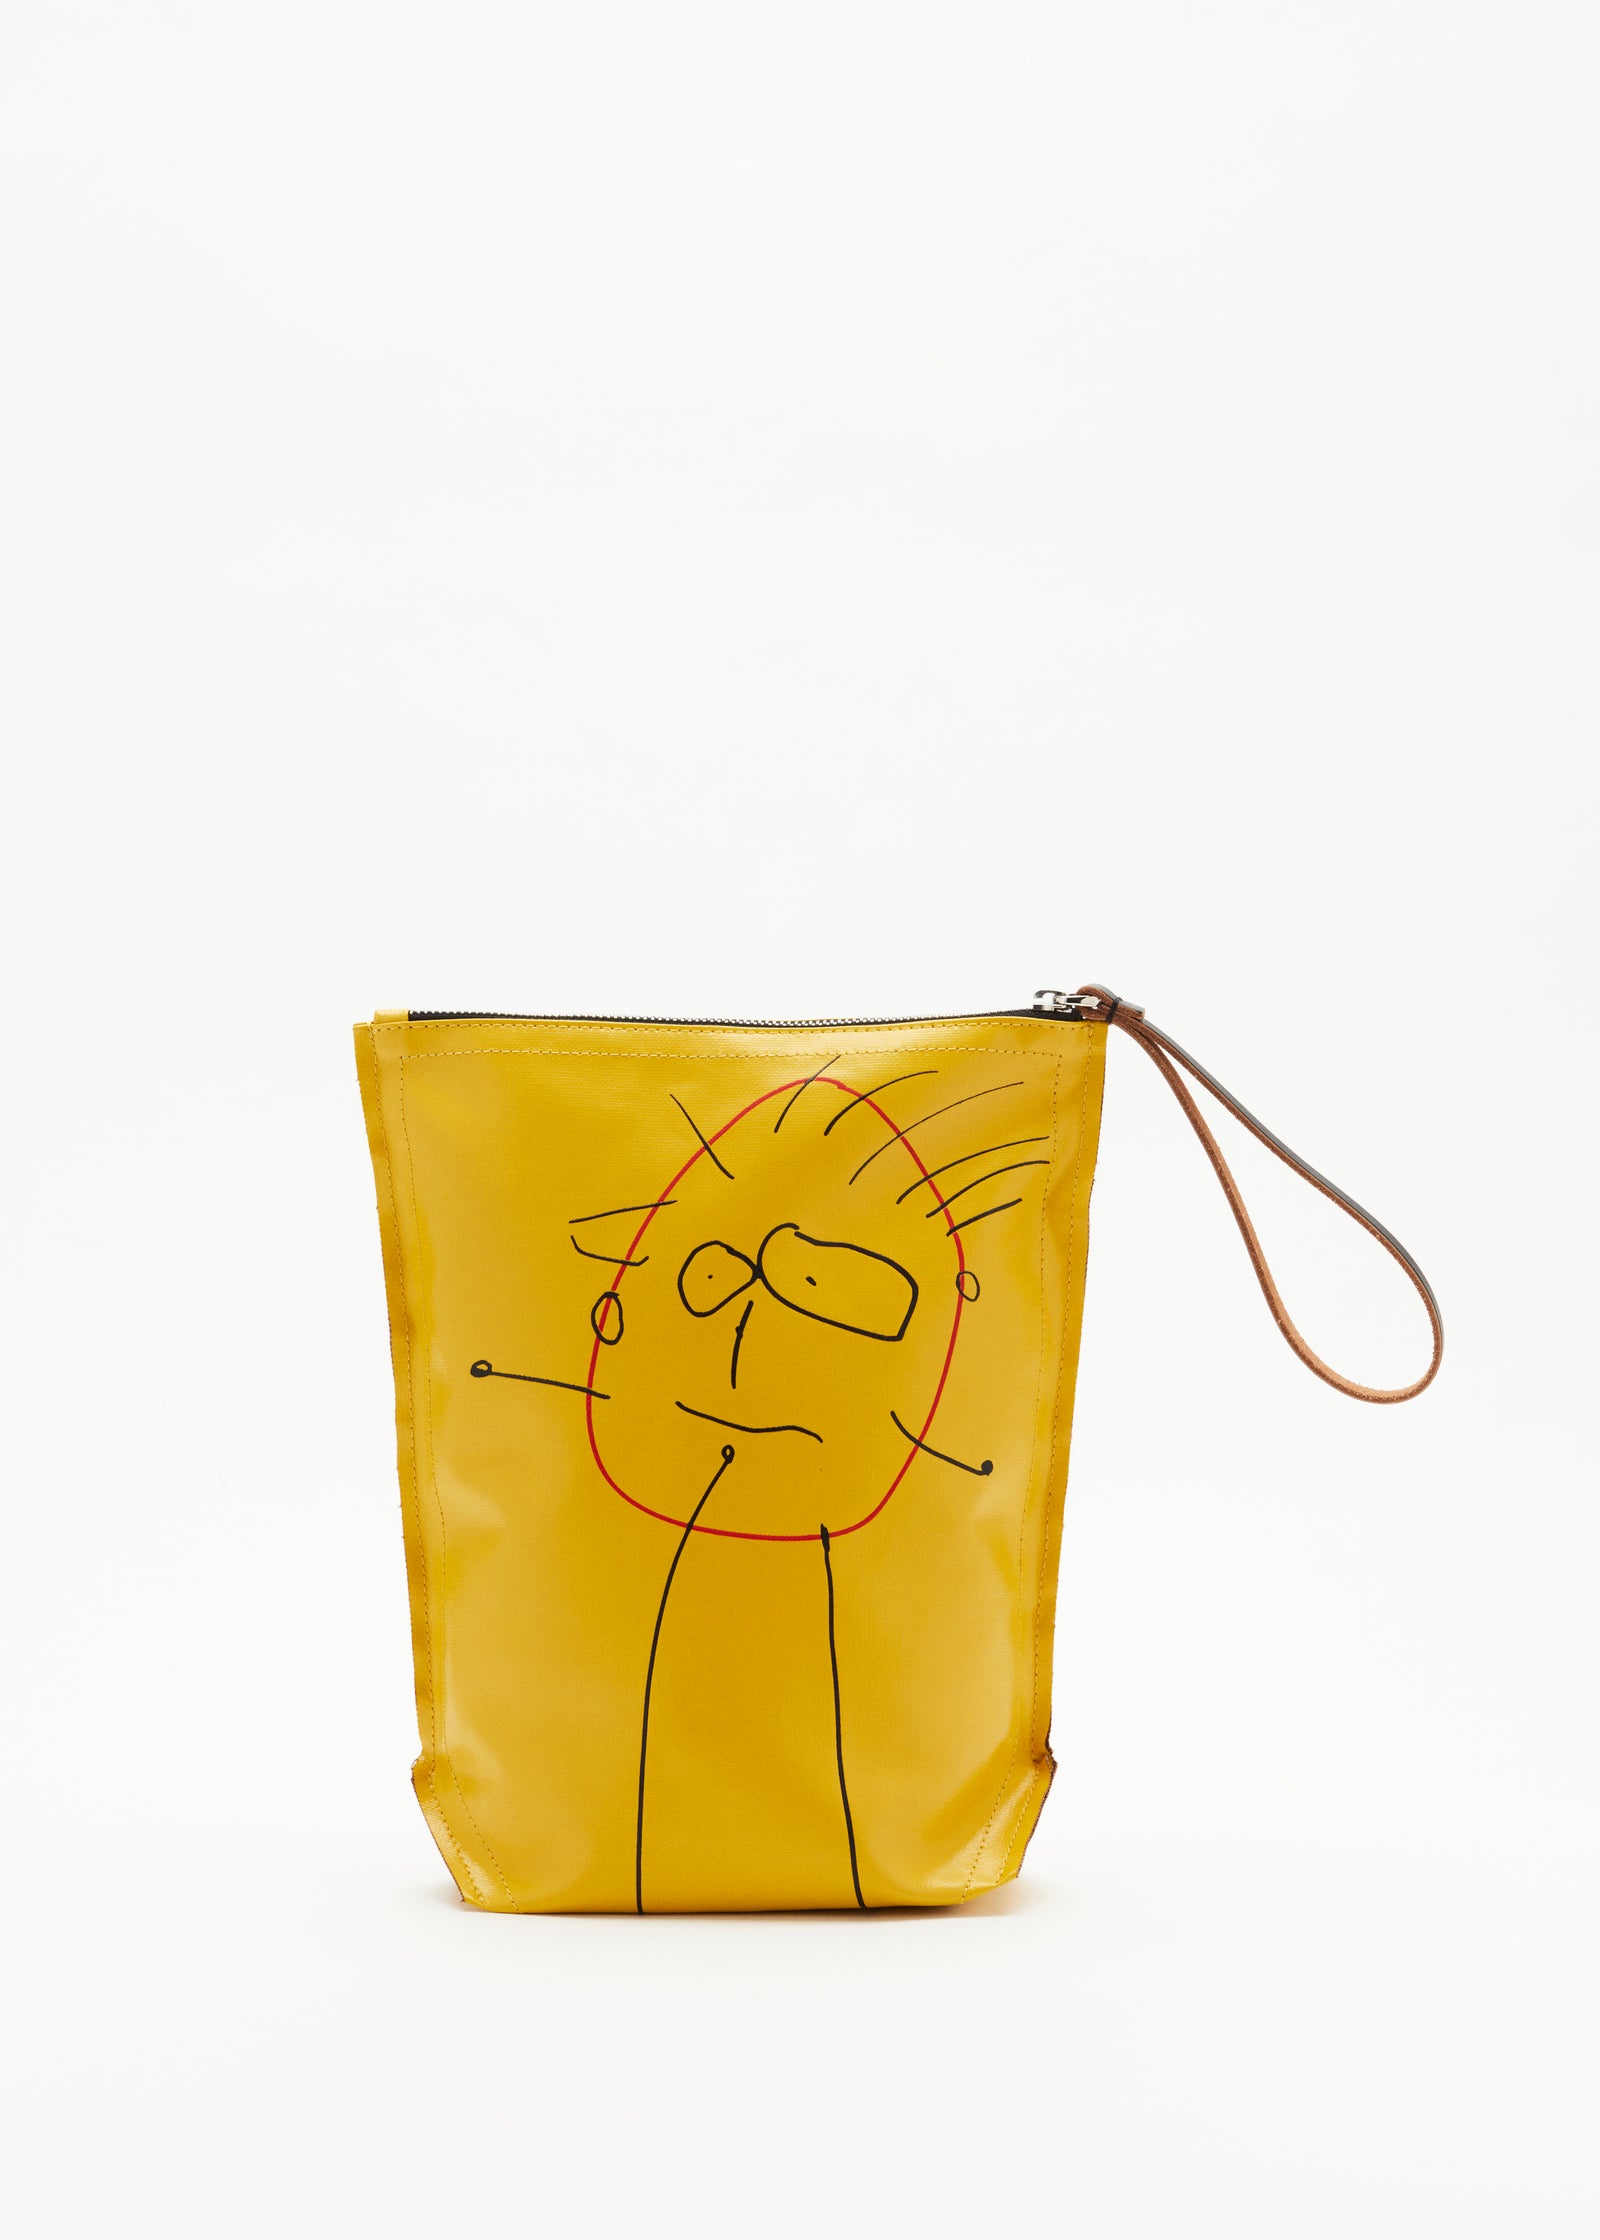 "PILI AND BIANCA" YELLOW POUCH